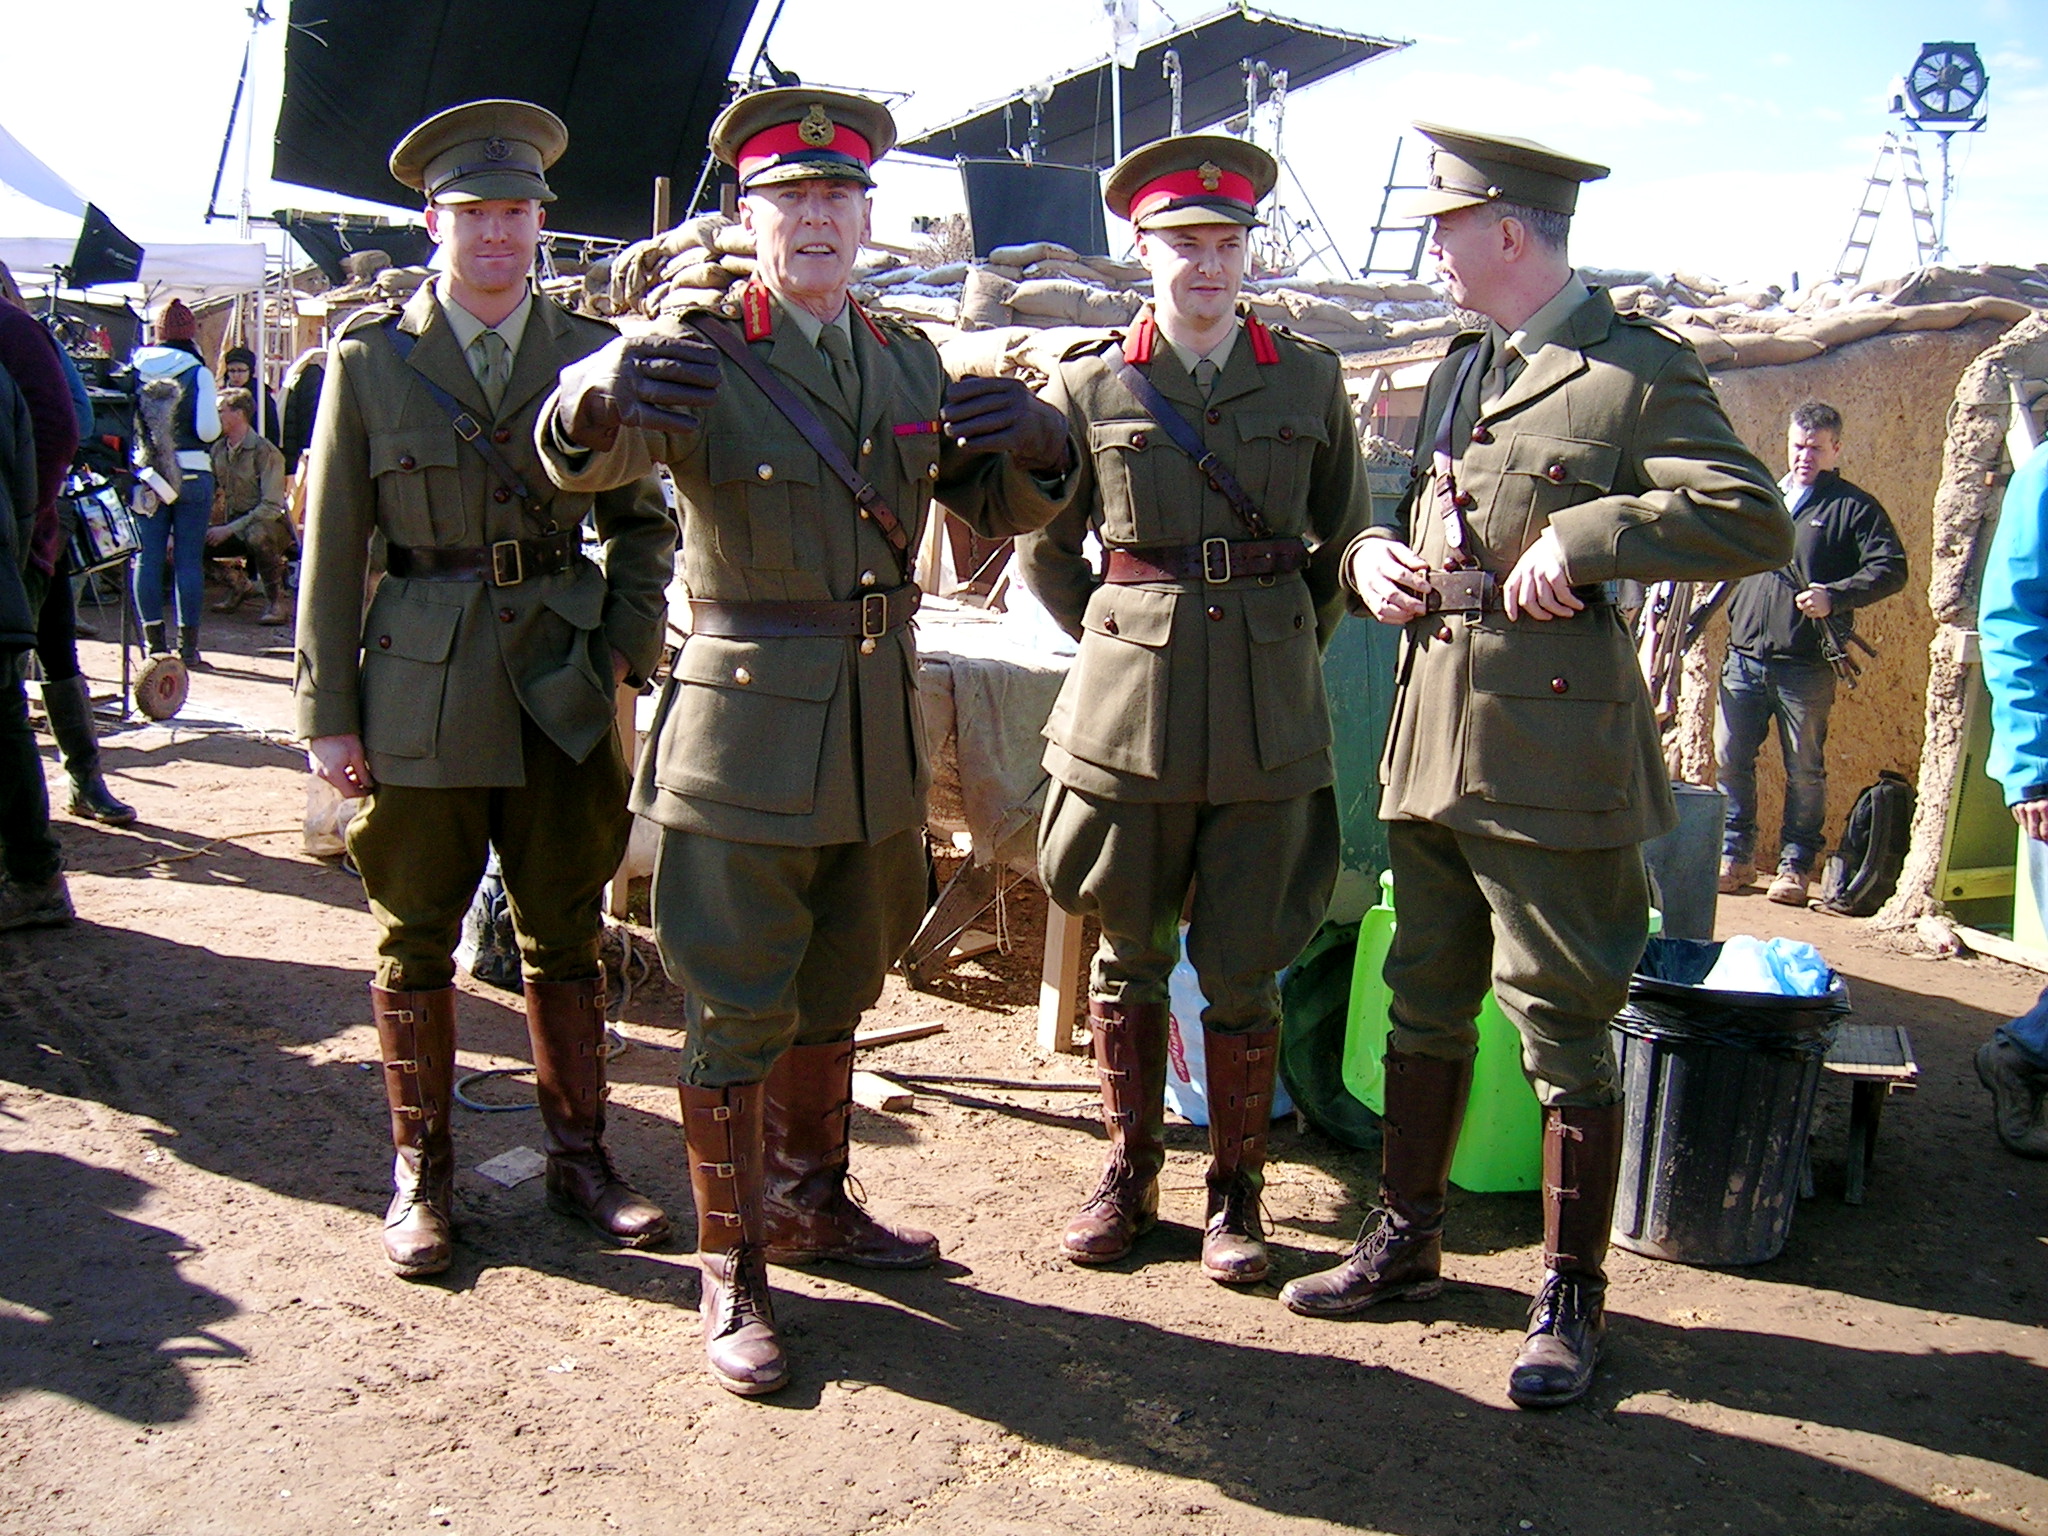 Craig Walsh-Wrightson (2nd left) being General-ly authoritative. July 2014